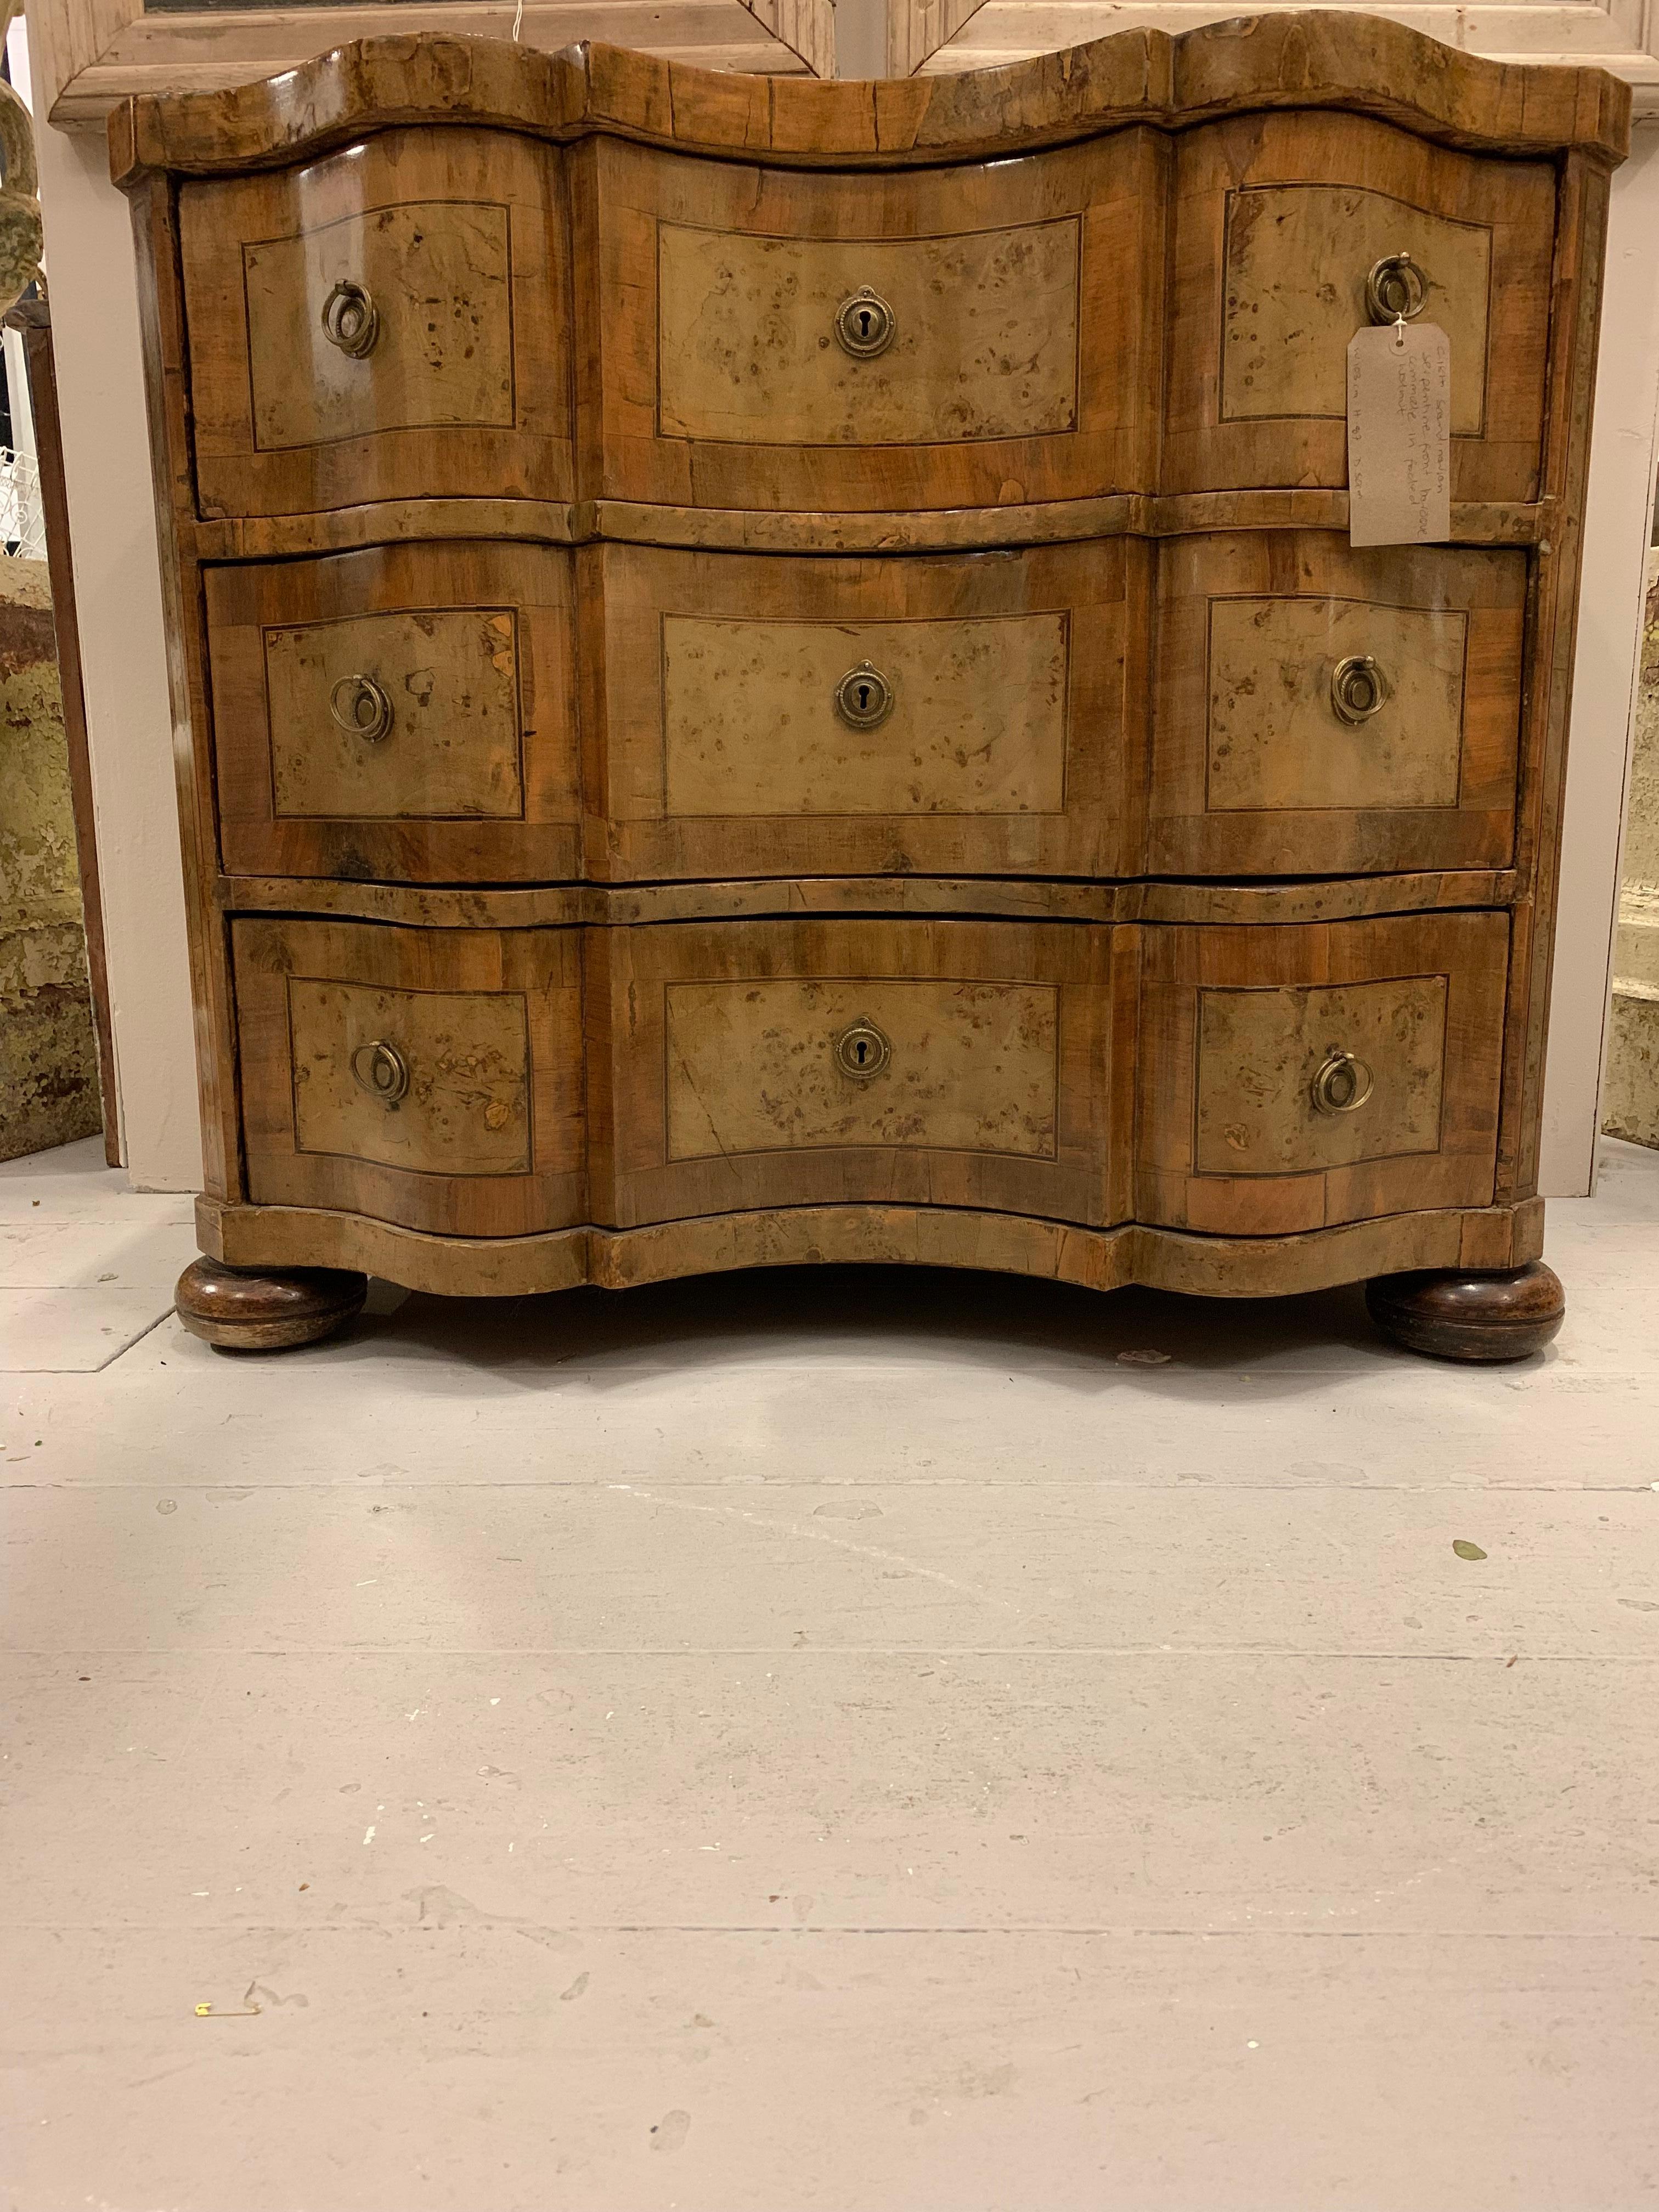 Wonderful late 18th century Swedish baroque commode.
The decorative serpentine front is in two tones of muted and pale walnut.
It has three deep useful drawers with the original hardware and sits on bun feet.
A versatile statement piece that